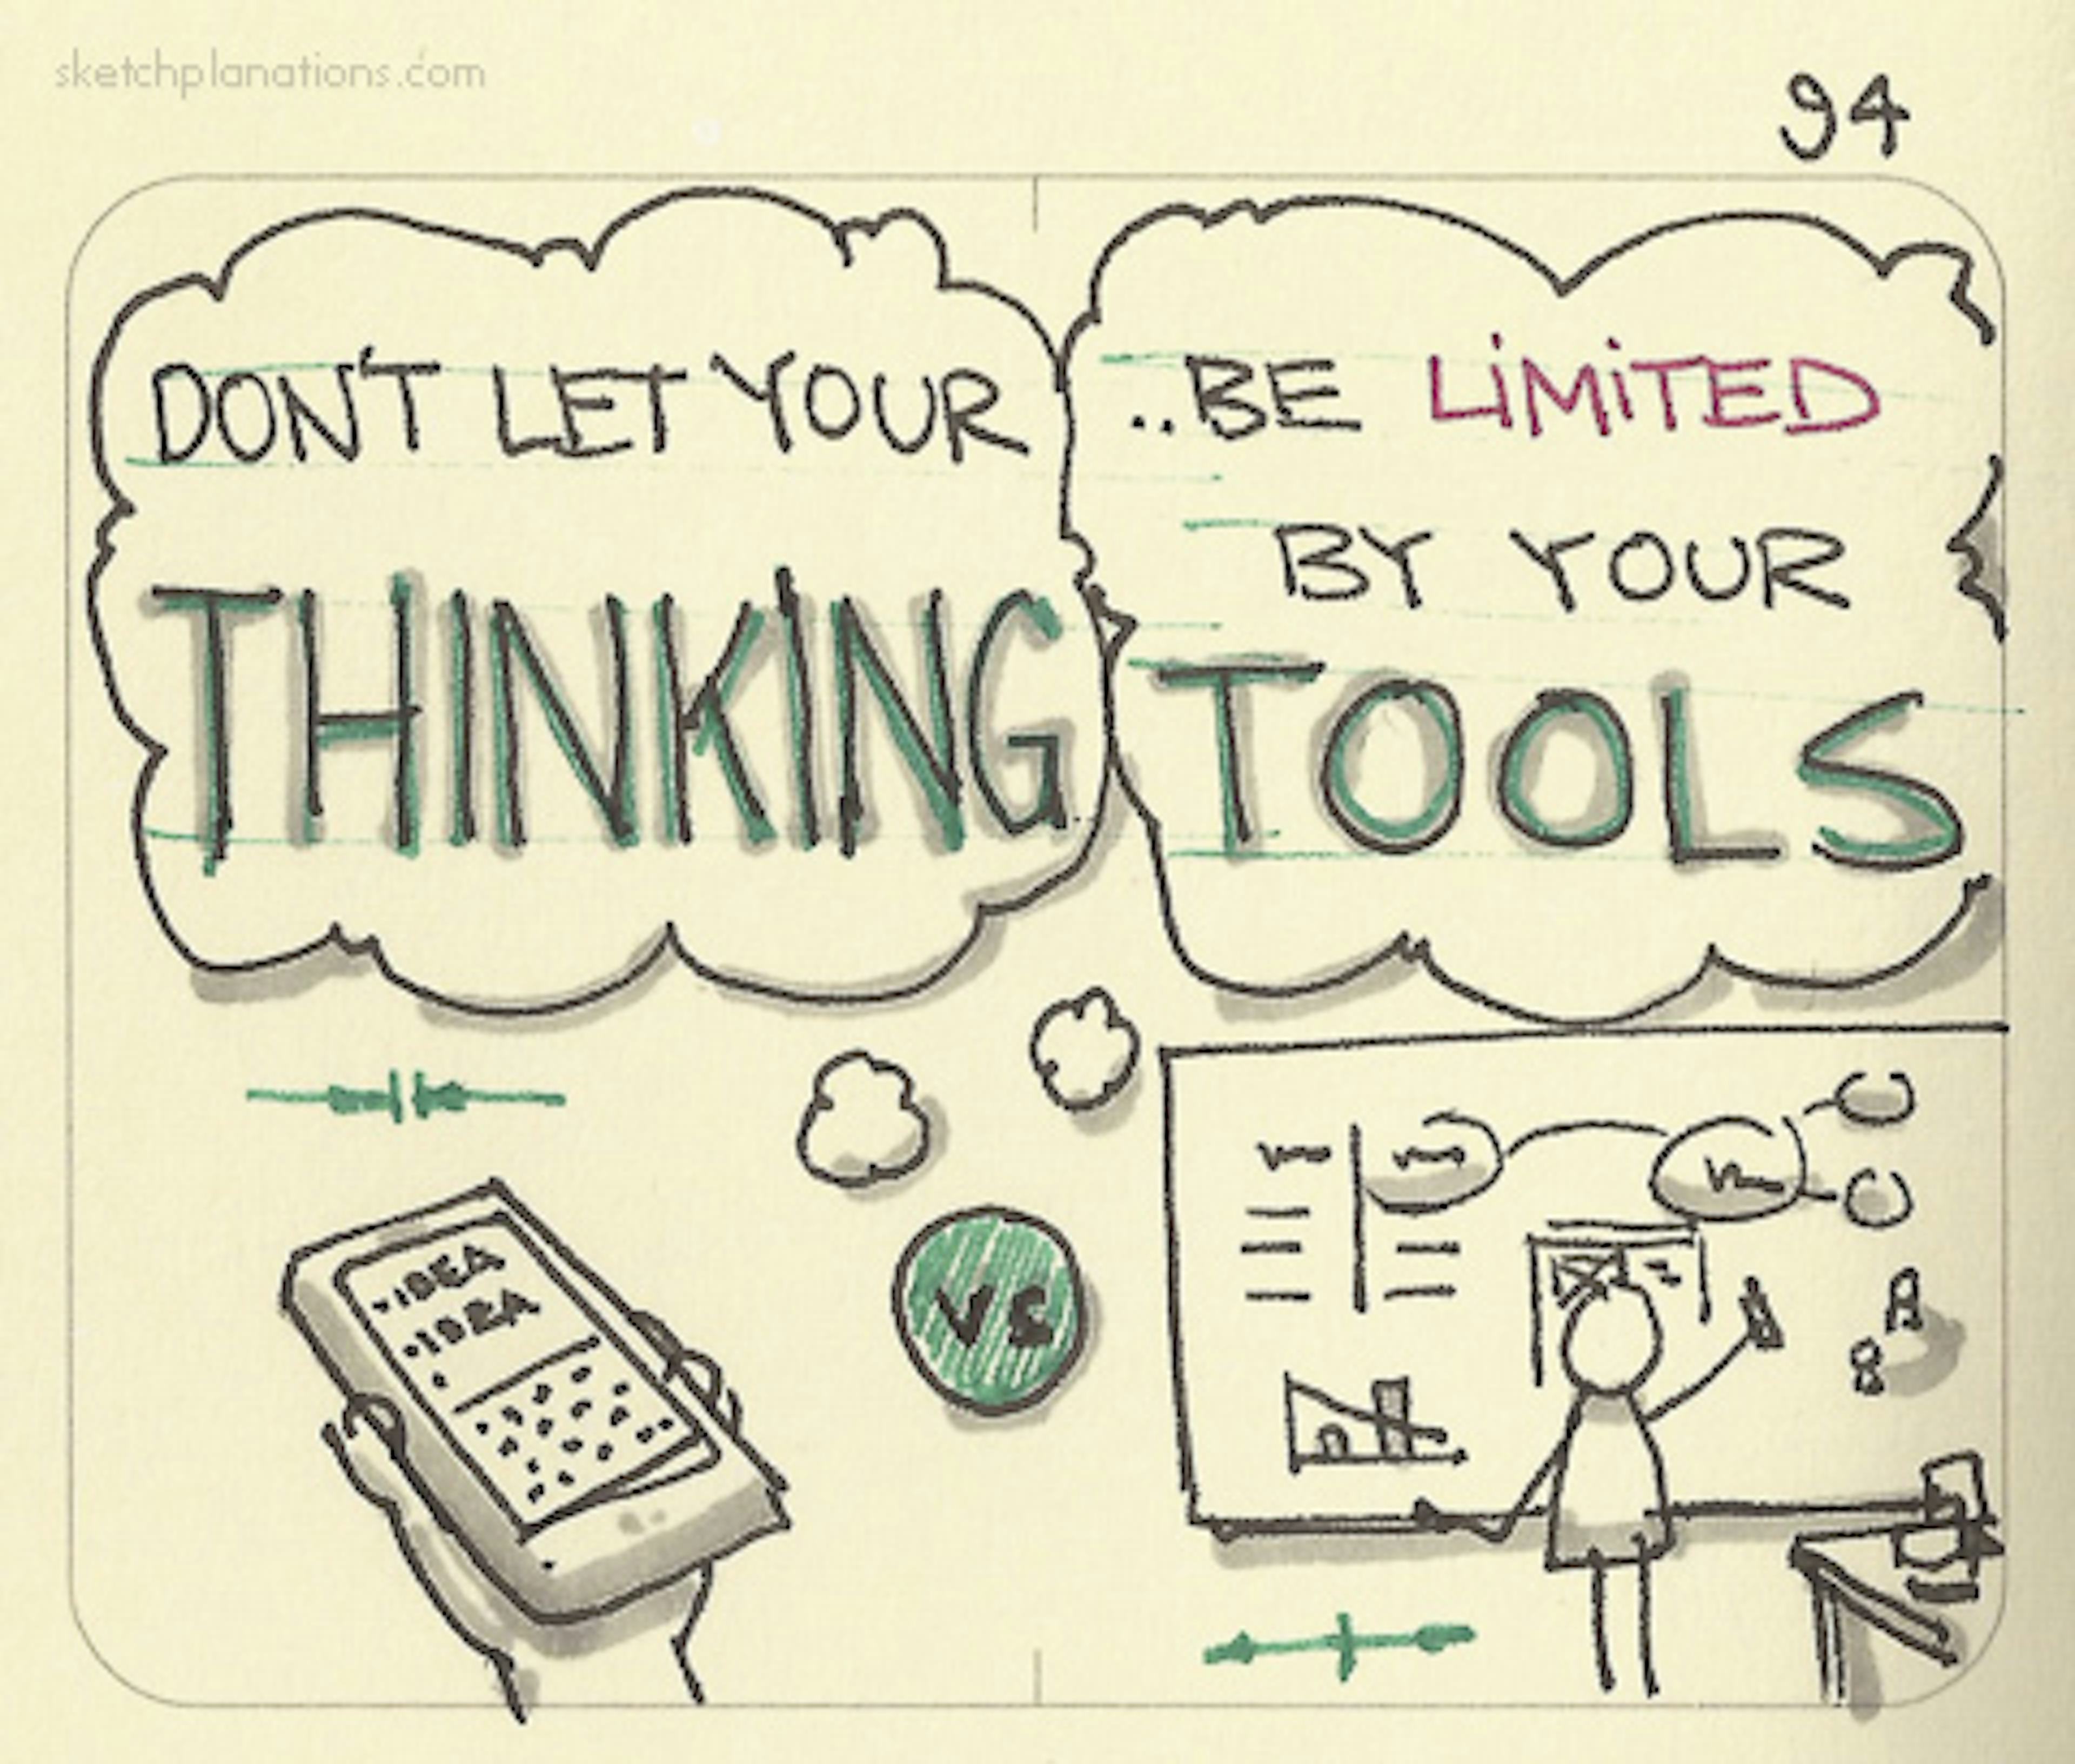 Don’t let your thinking be limited by your tools - Sketchplanations